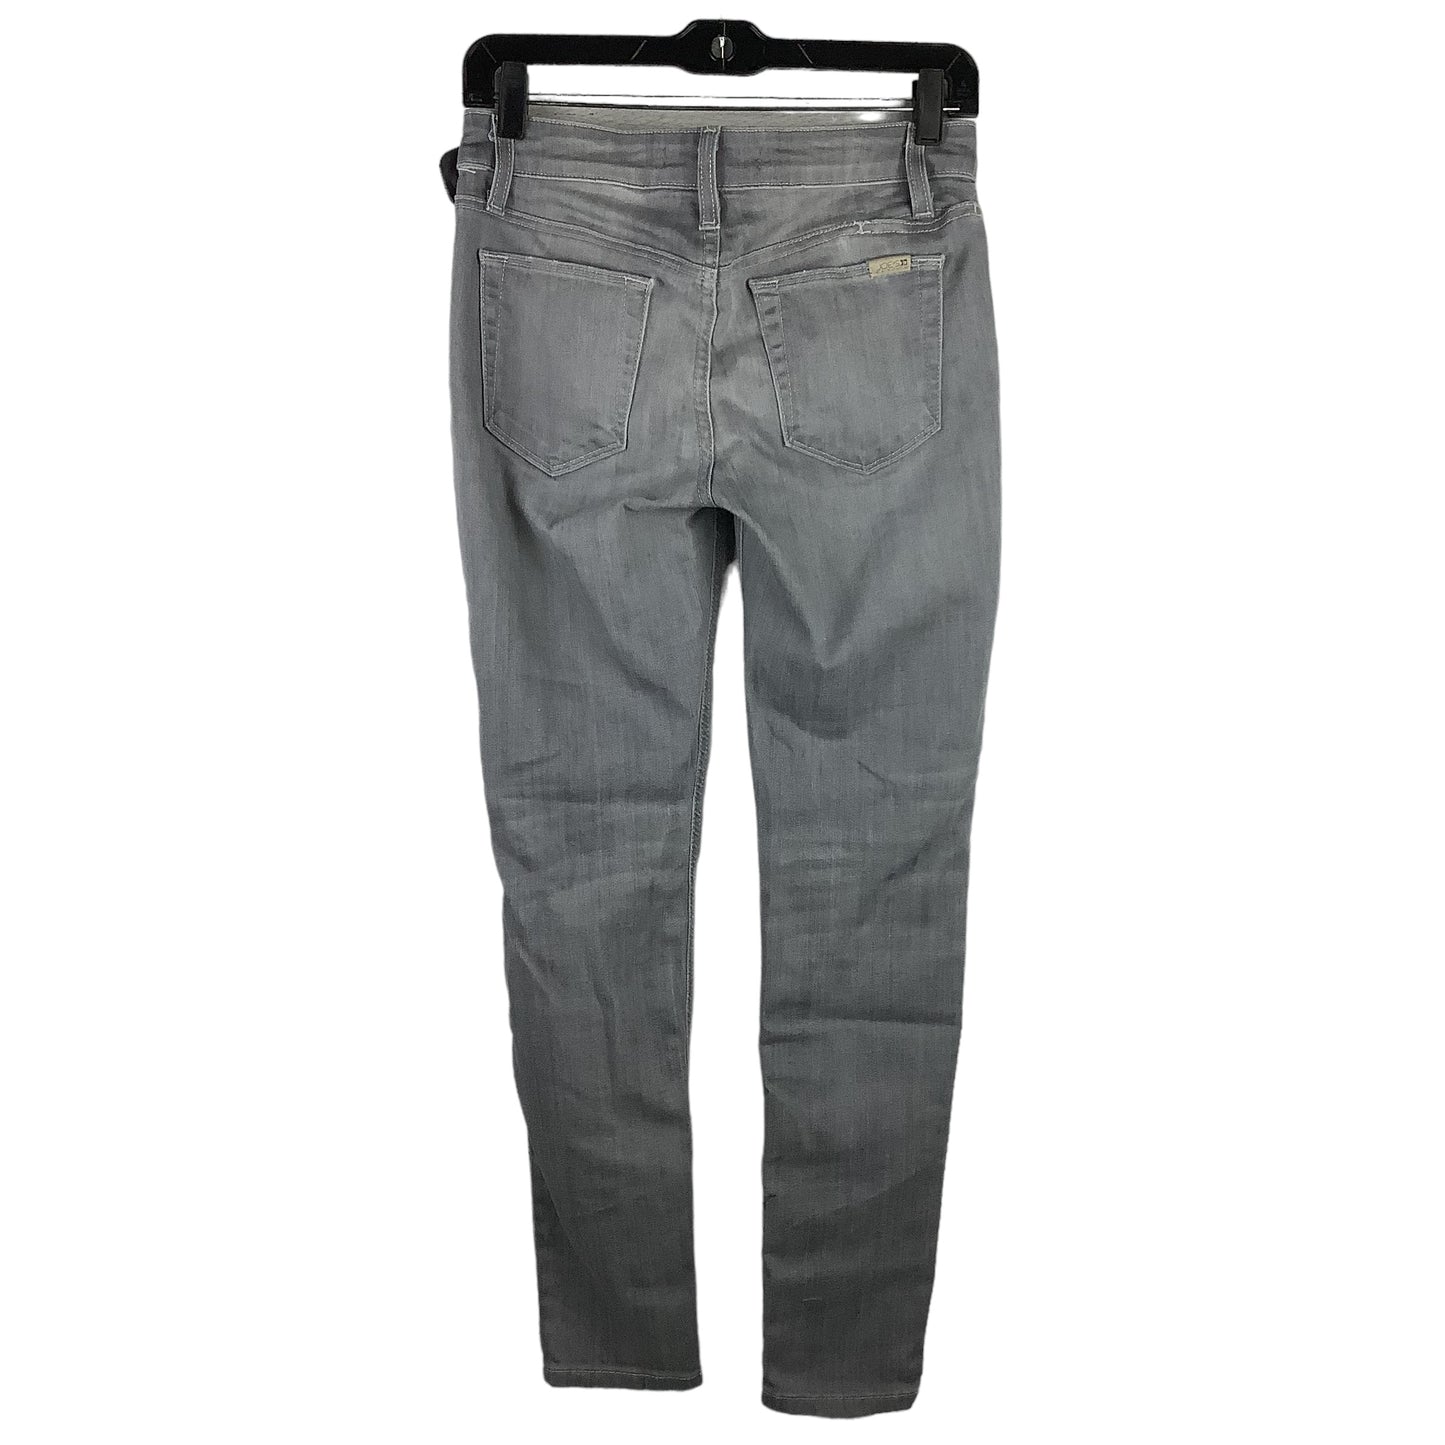 Pants Ankle By Joes Jeans  Size: 6